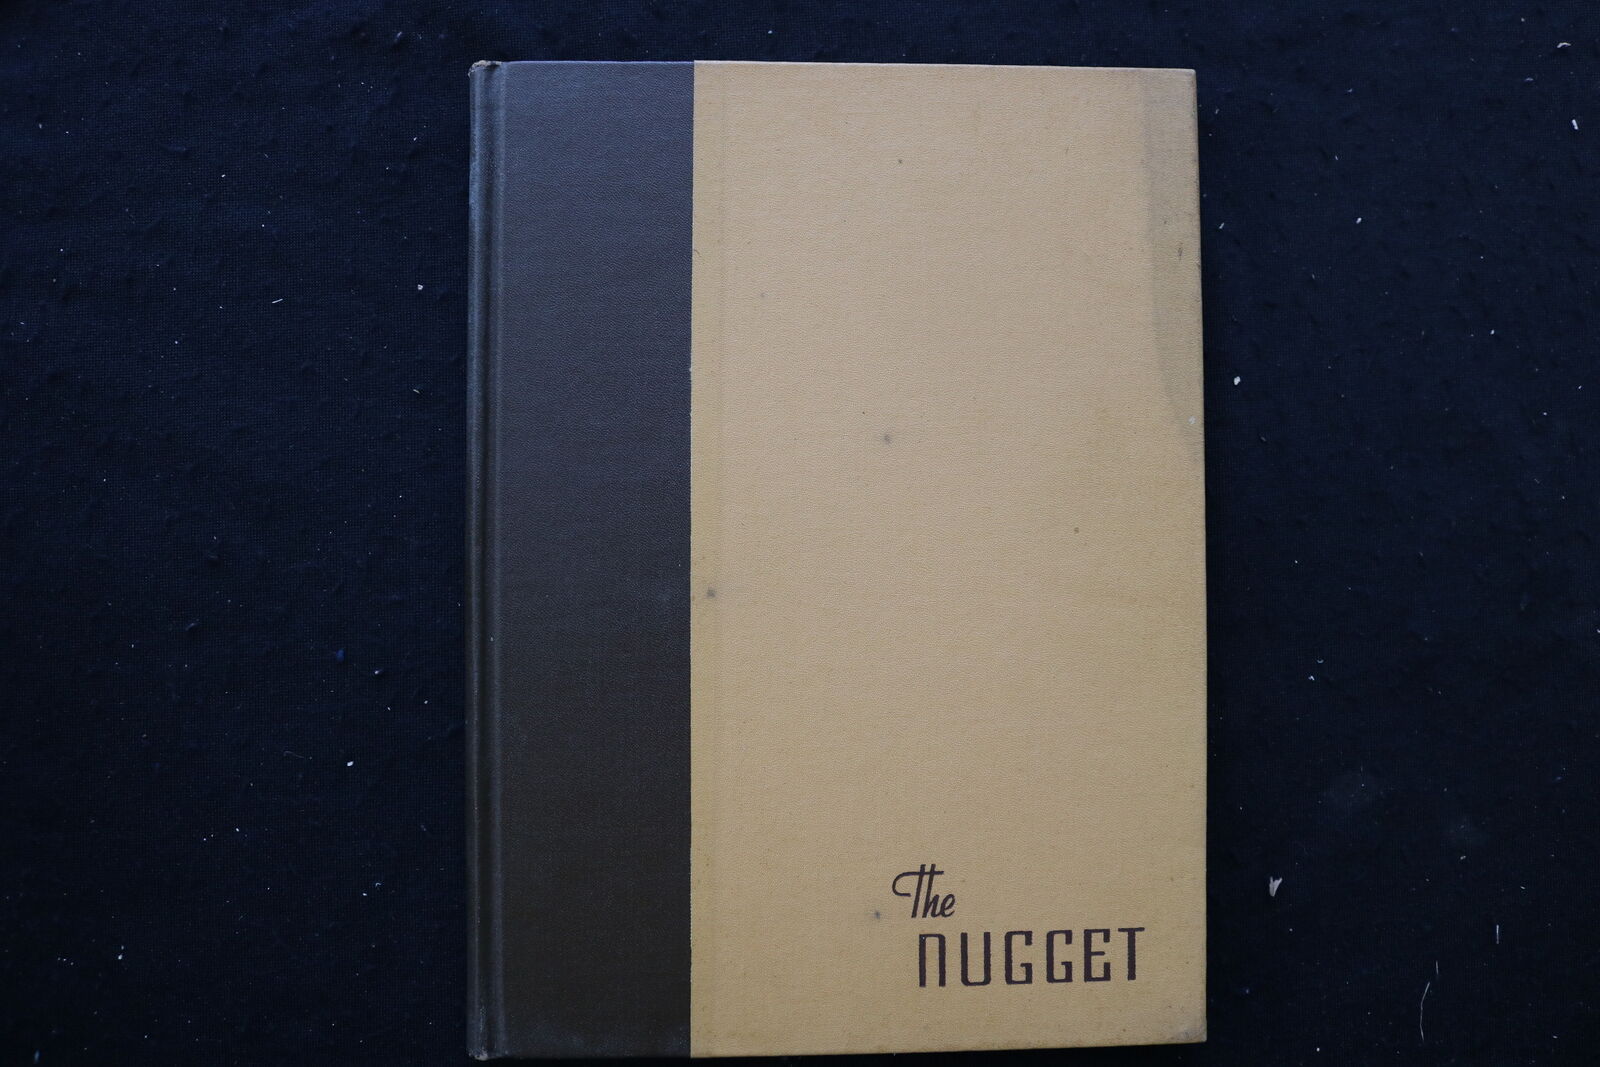 1938 THE NUGGET BUTLER HIGH SCHOOL YEARBOOK - BUTLER, NEW JERSEY - YB 3432